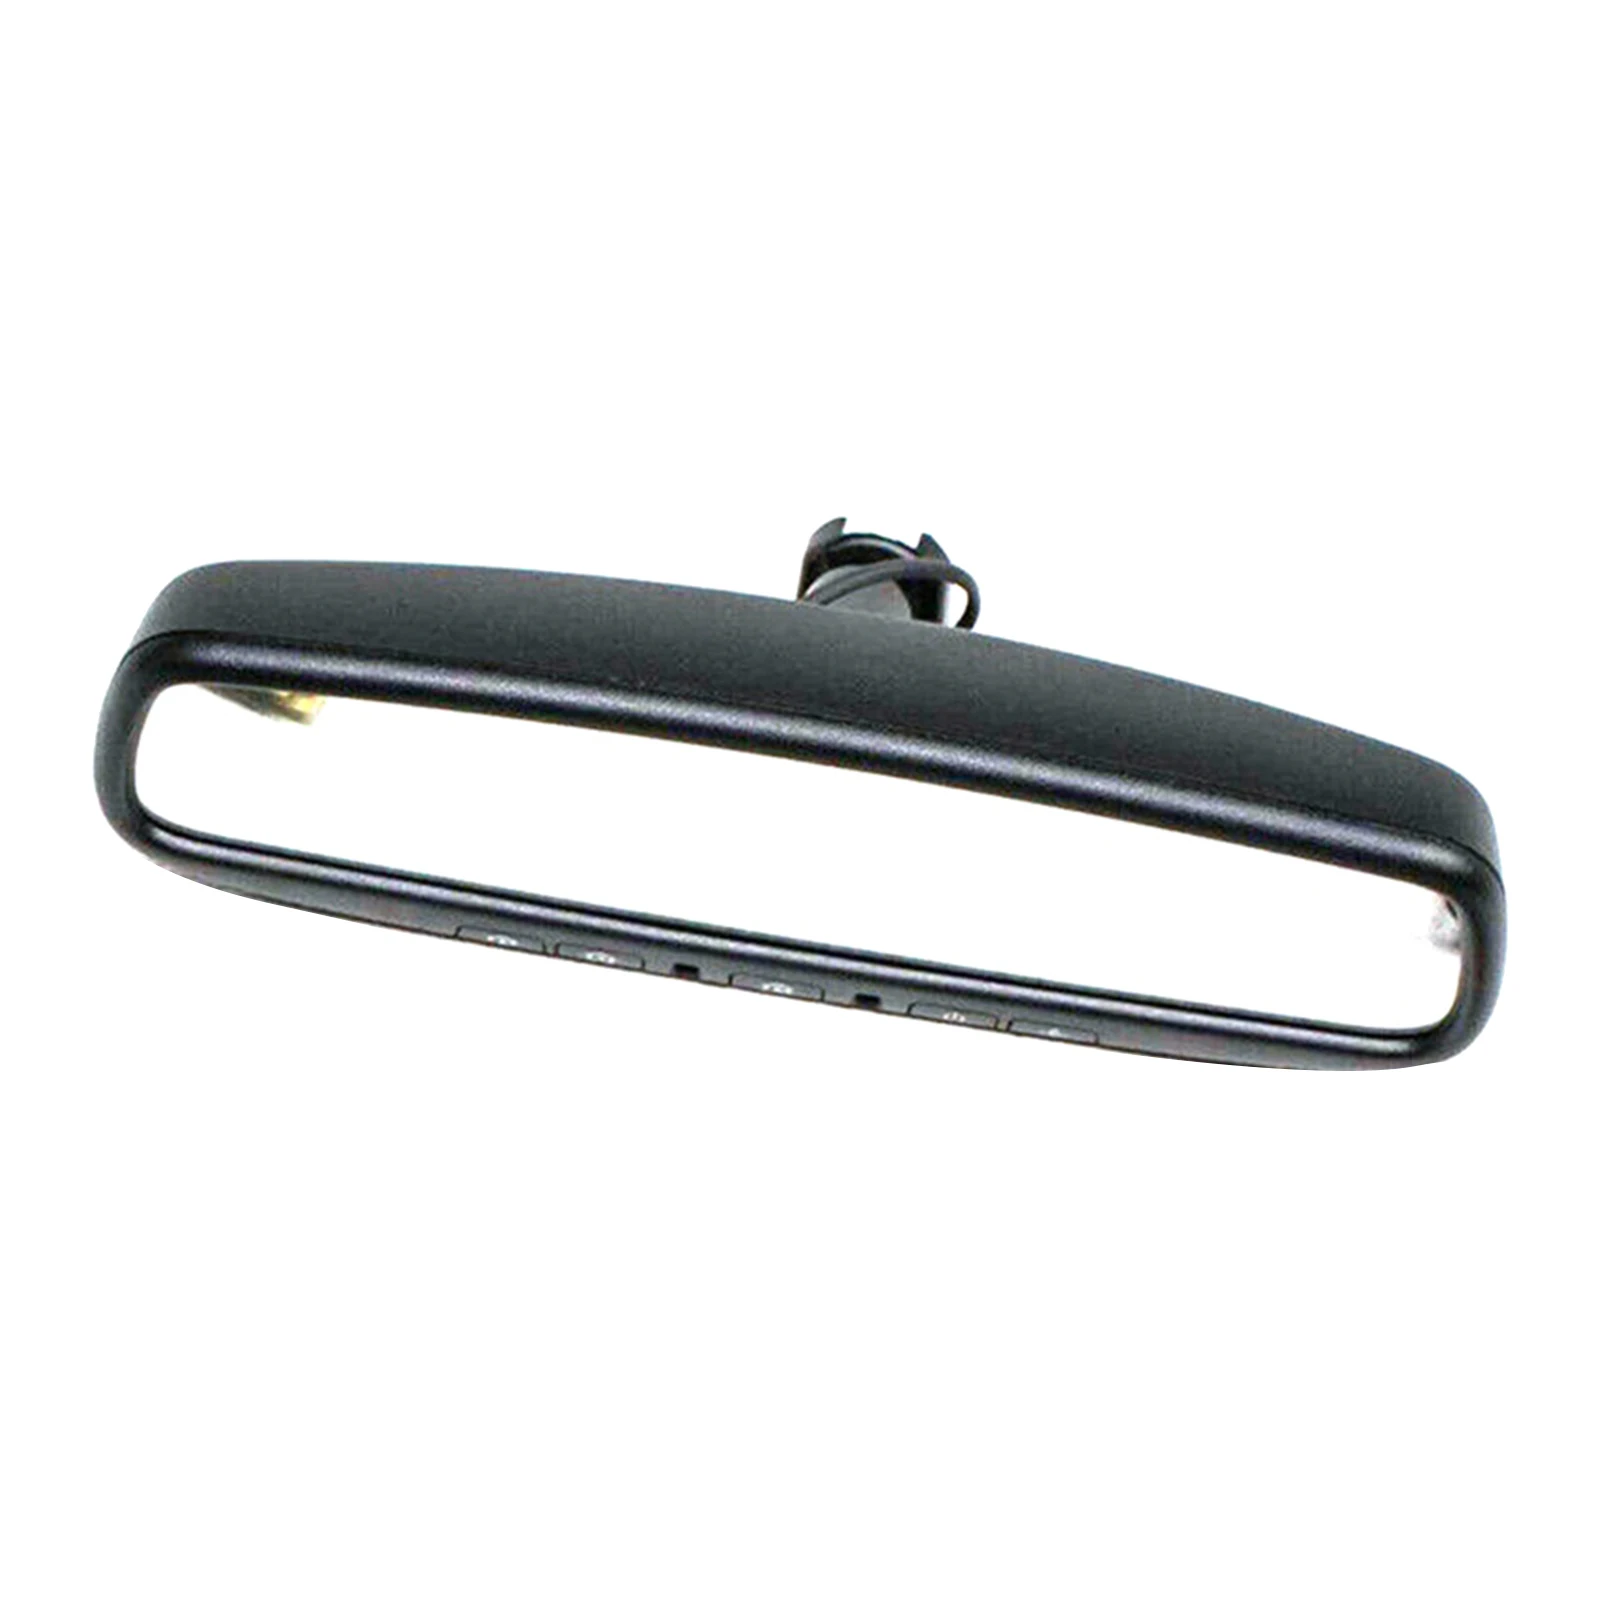 Inside Rear View Mirror 851013x100 Clear Fit for Hyundai SE Accent GLS